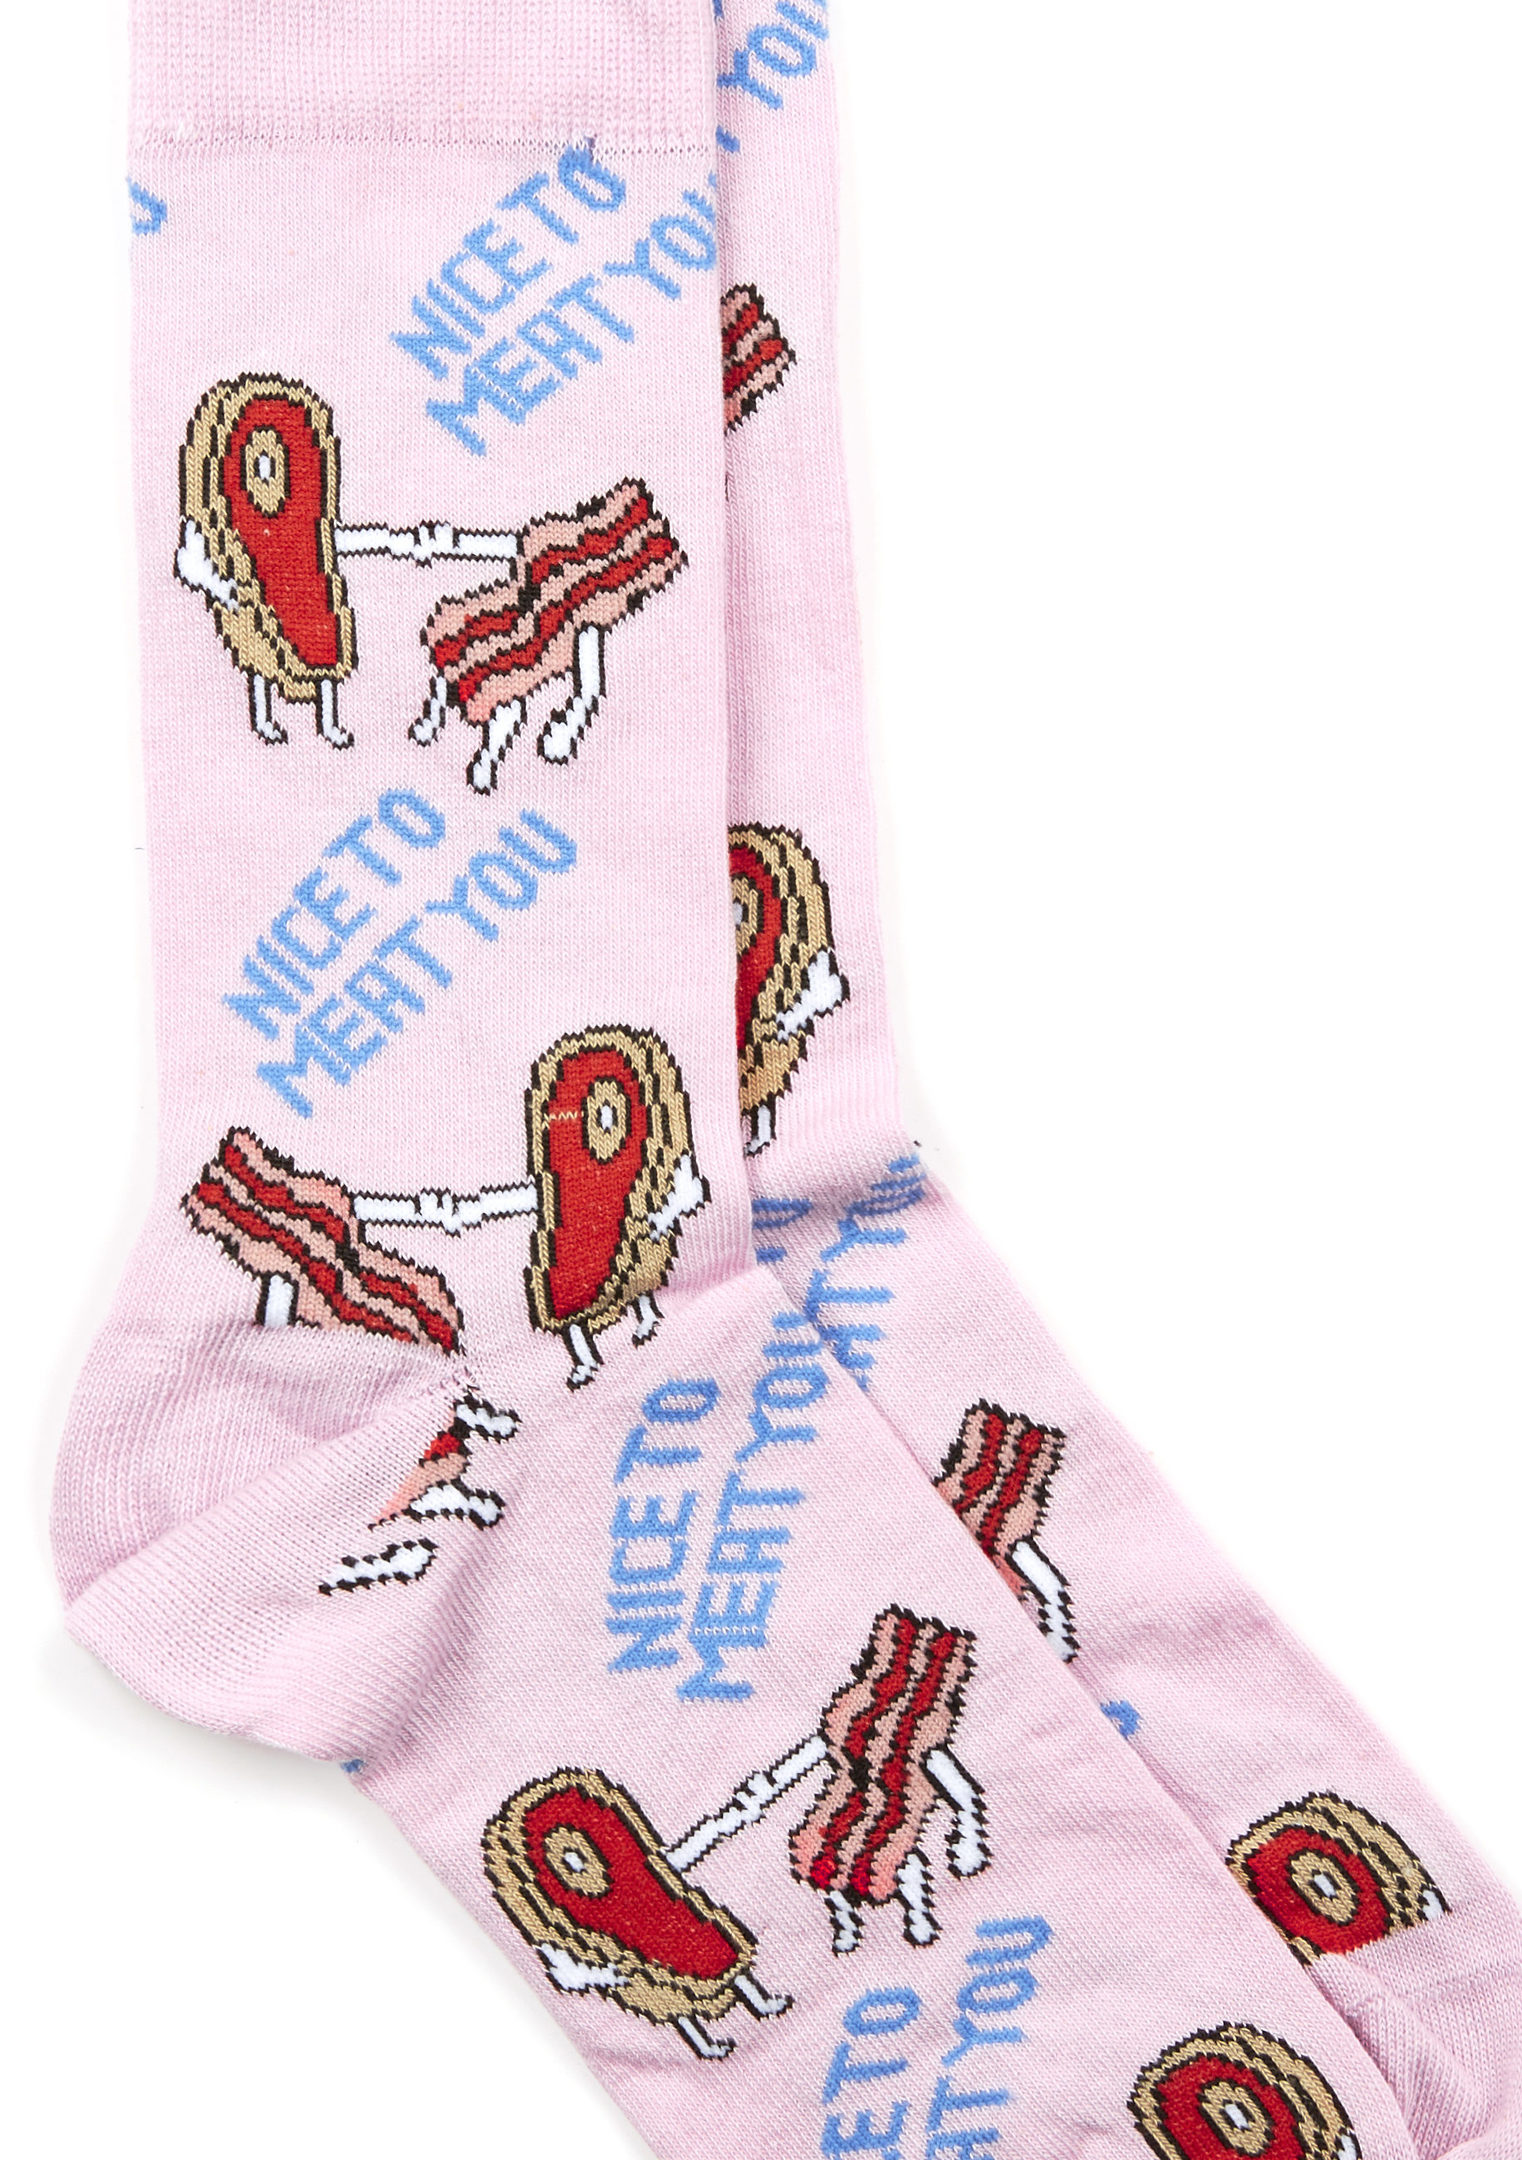 Going on a blind date? Topman have created a talking point with their meat print socks, £3